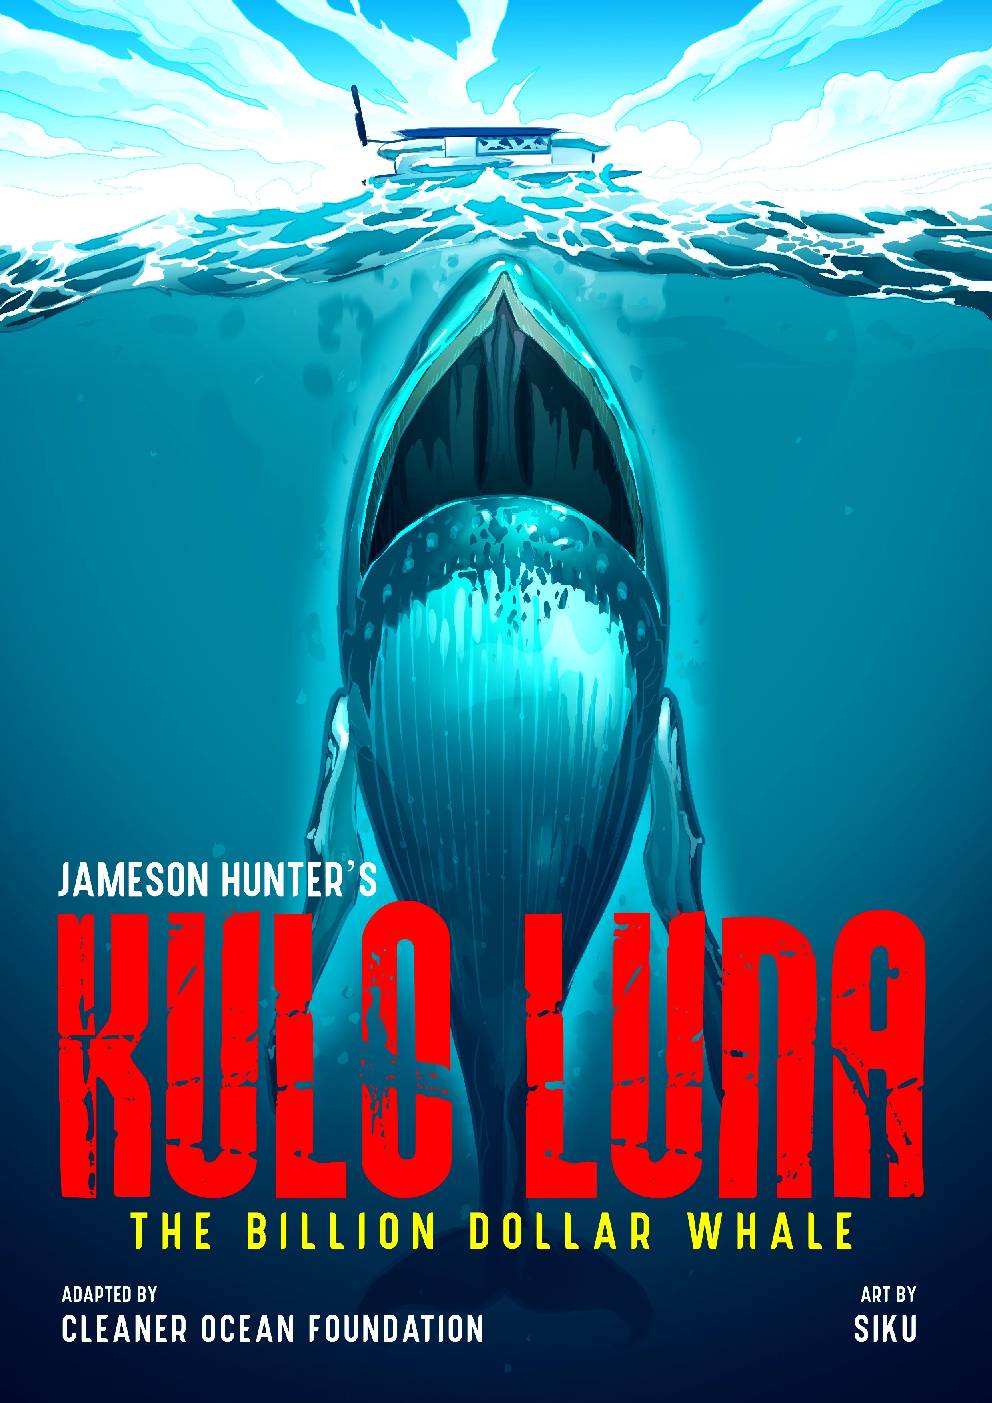 Kulo Luna film scripts and product placements, original ocean adventure series written by Scottish author Jameson Hunter